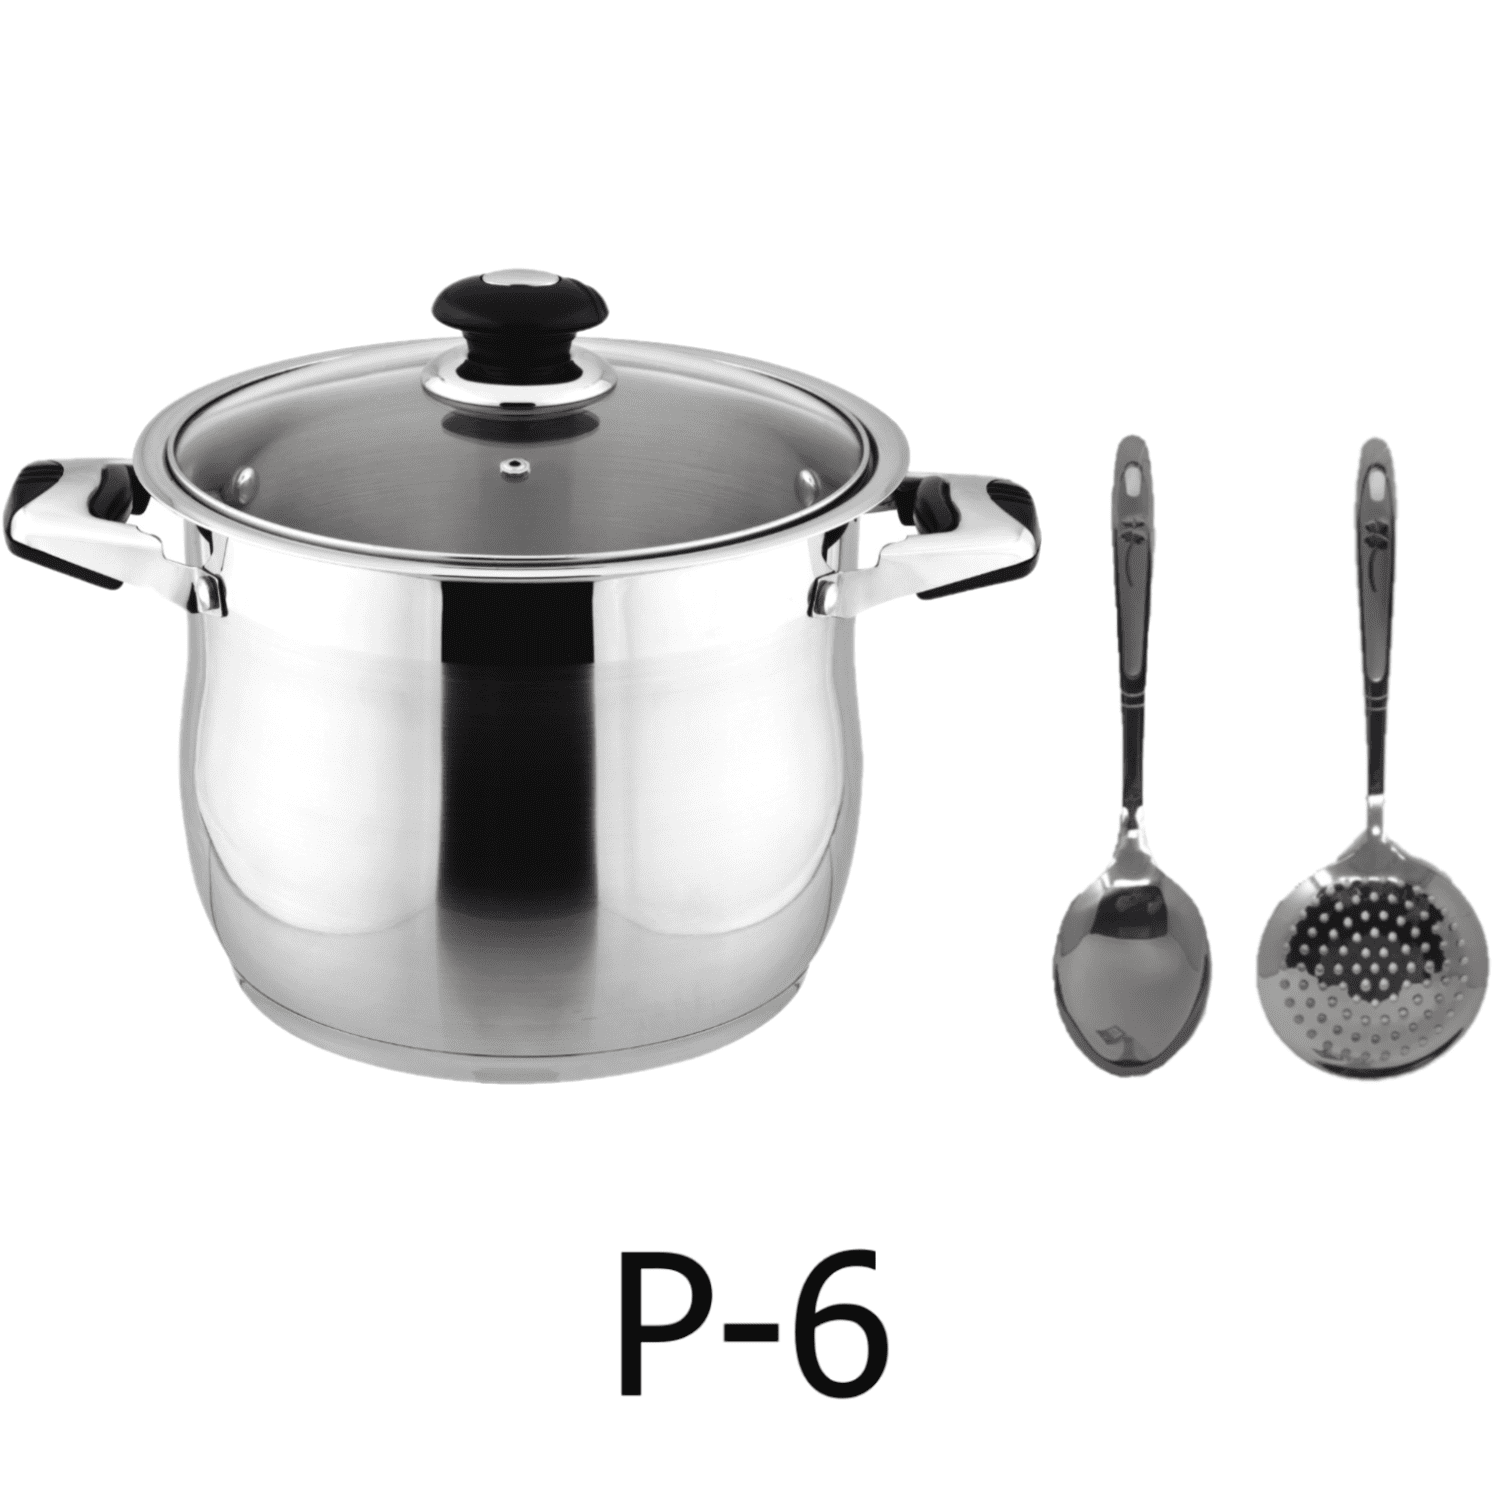 BEZIA Cooking Pot with Lid, 6 Quart Nonstick Stock Pot/Stockpot with Lid,  Non Stick 6 QT Large Capacity Induction Pot for Soup, Broth, Chili, Stew 